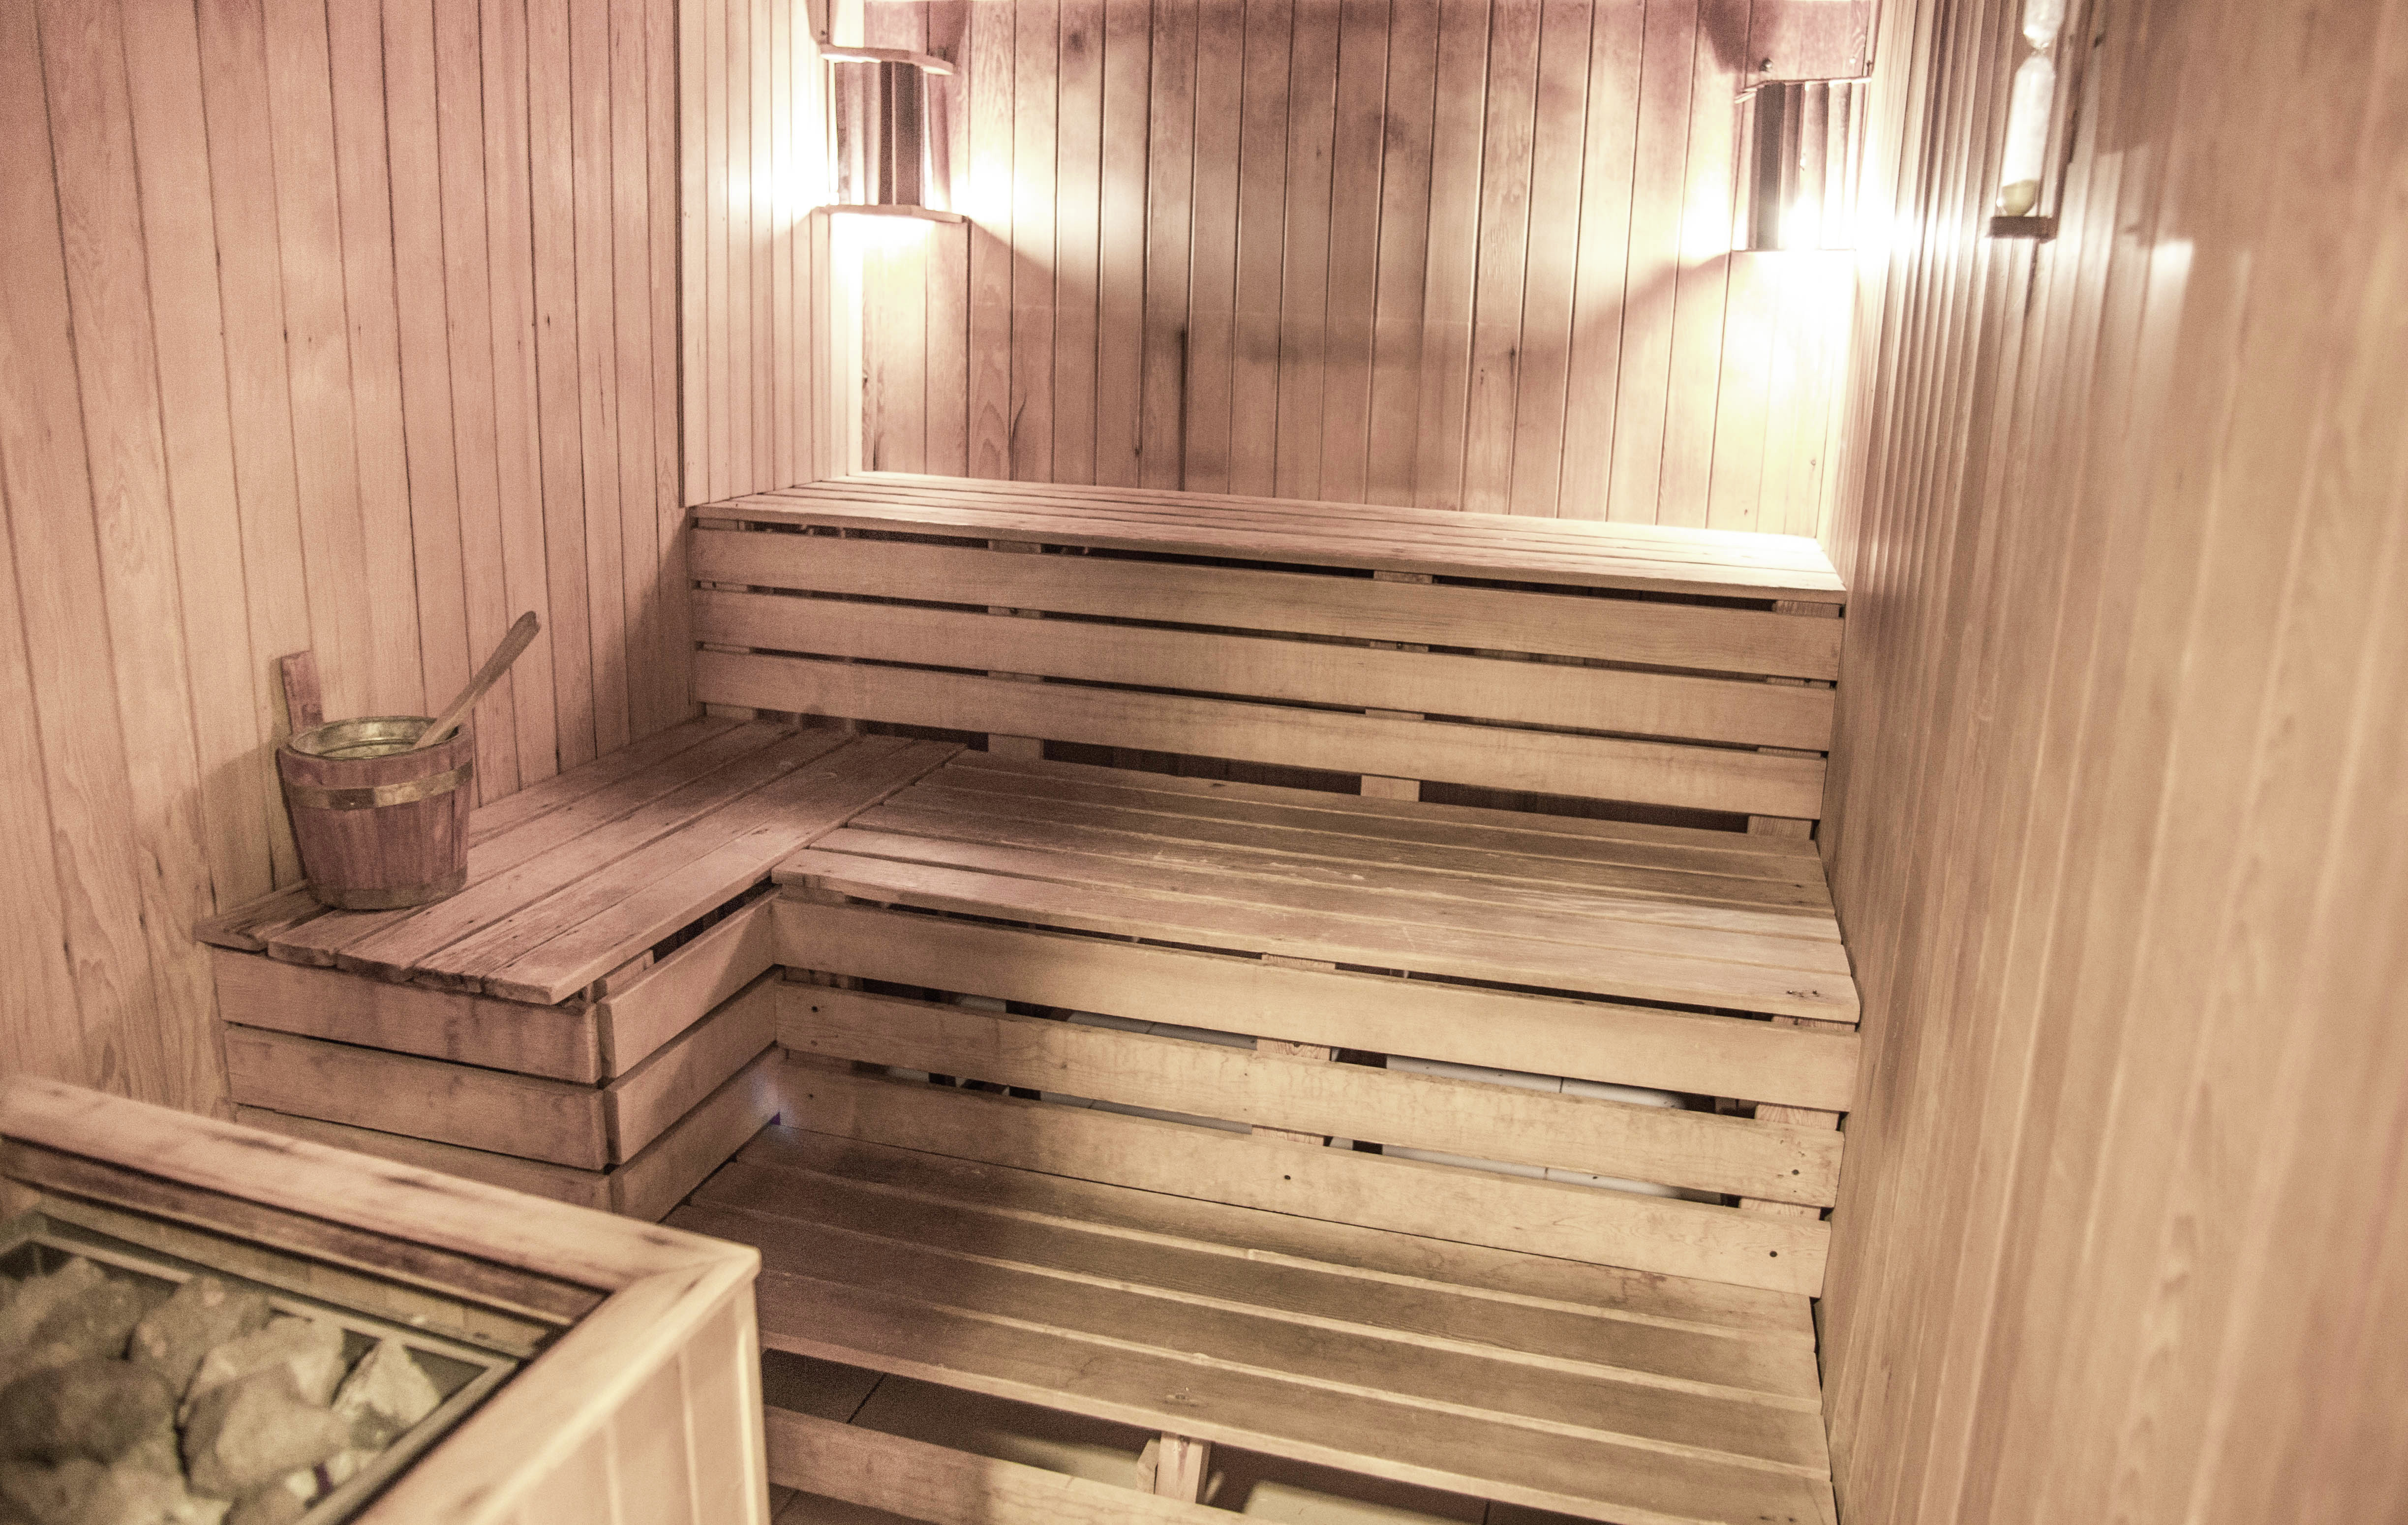  Steam Room Spa at Hilton Fitness